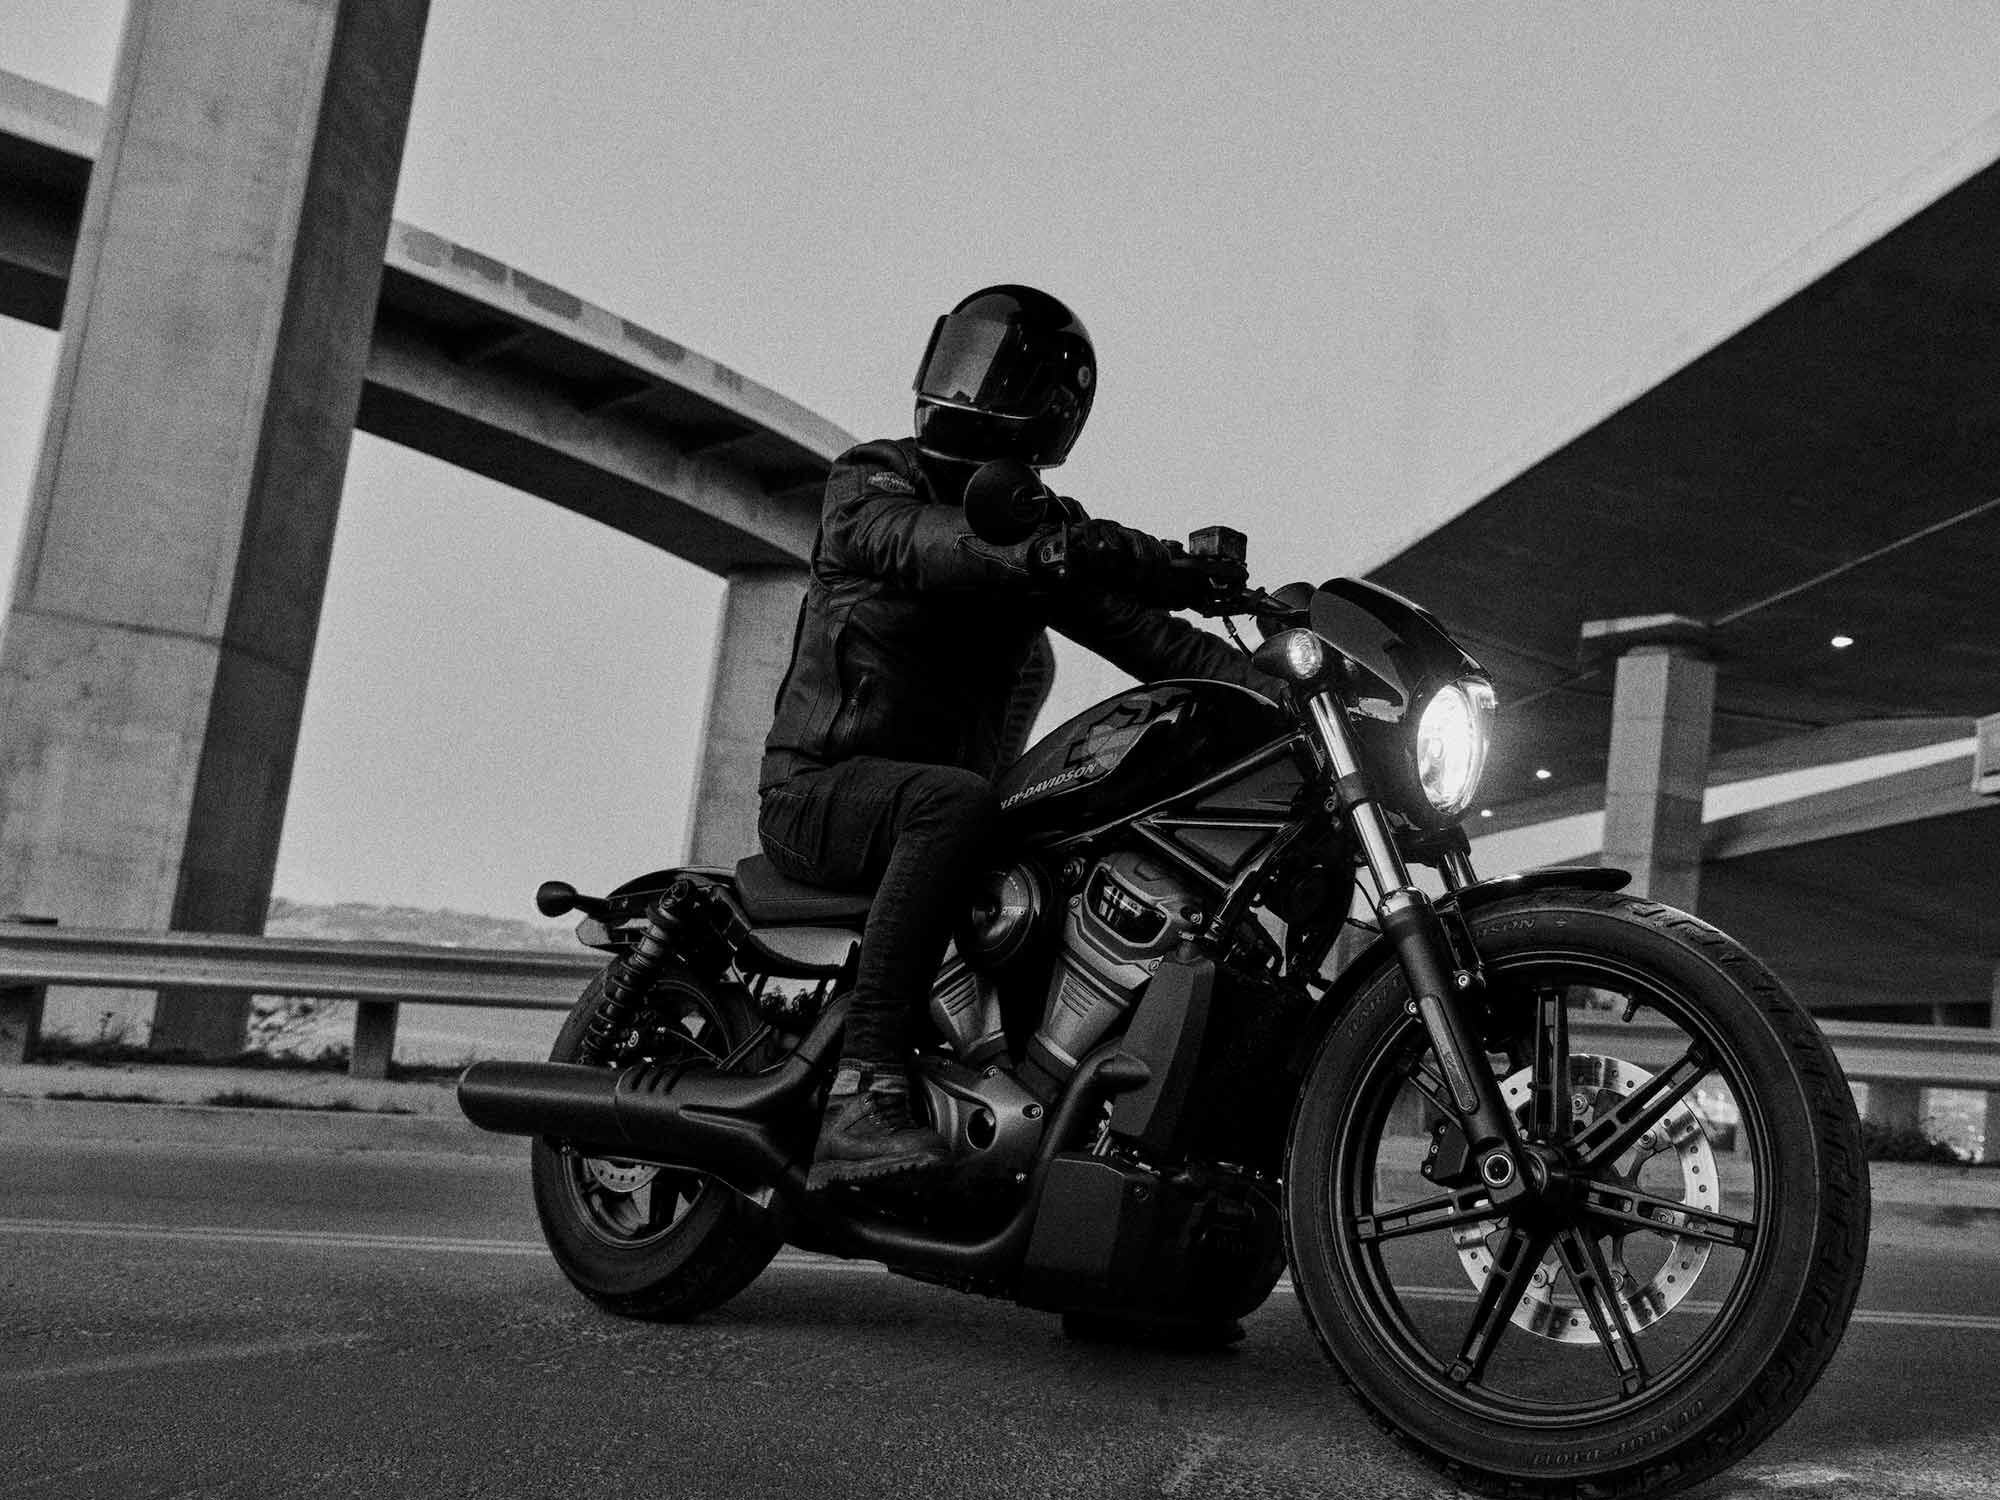 The 2022 Harley-Davidson Nightster: low stance, low bars, low everything.